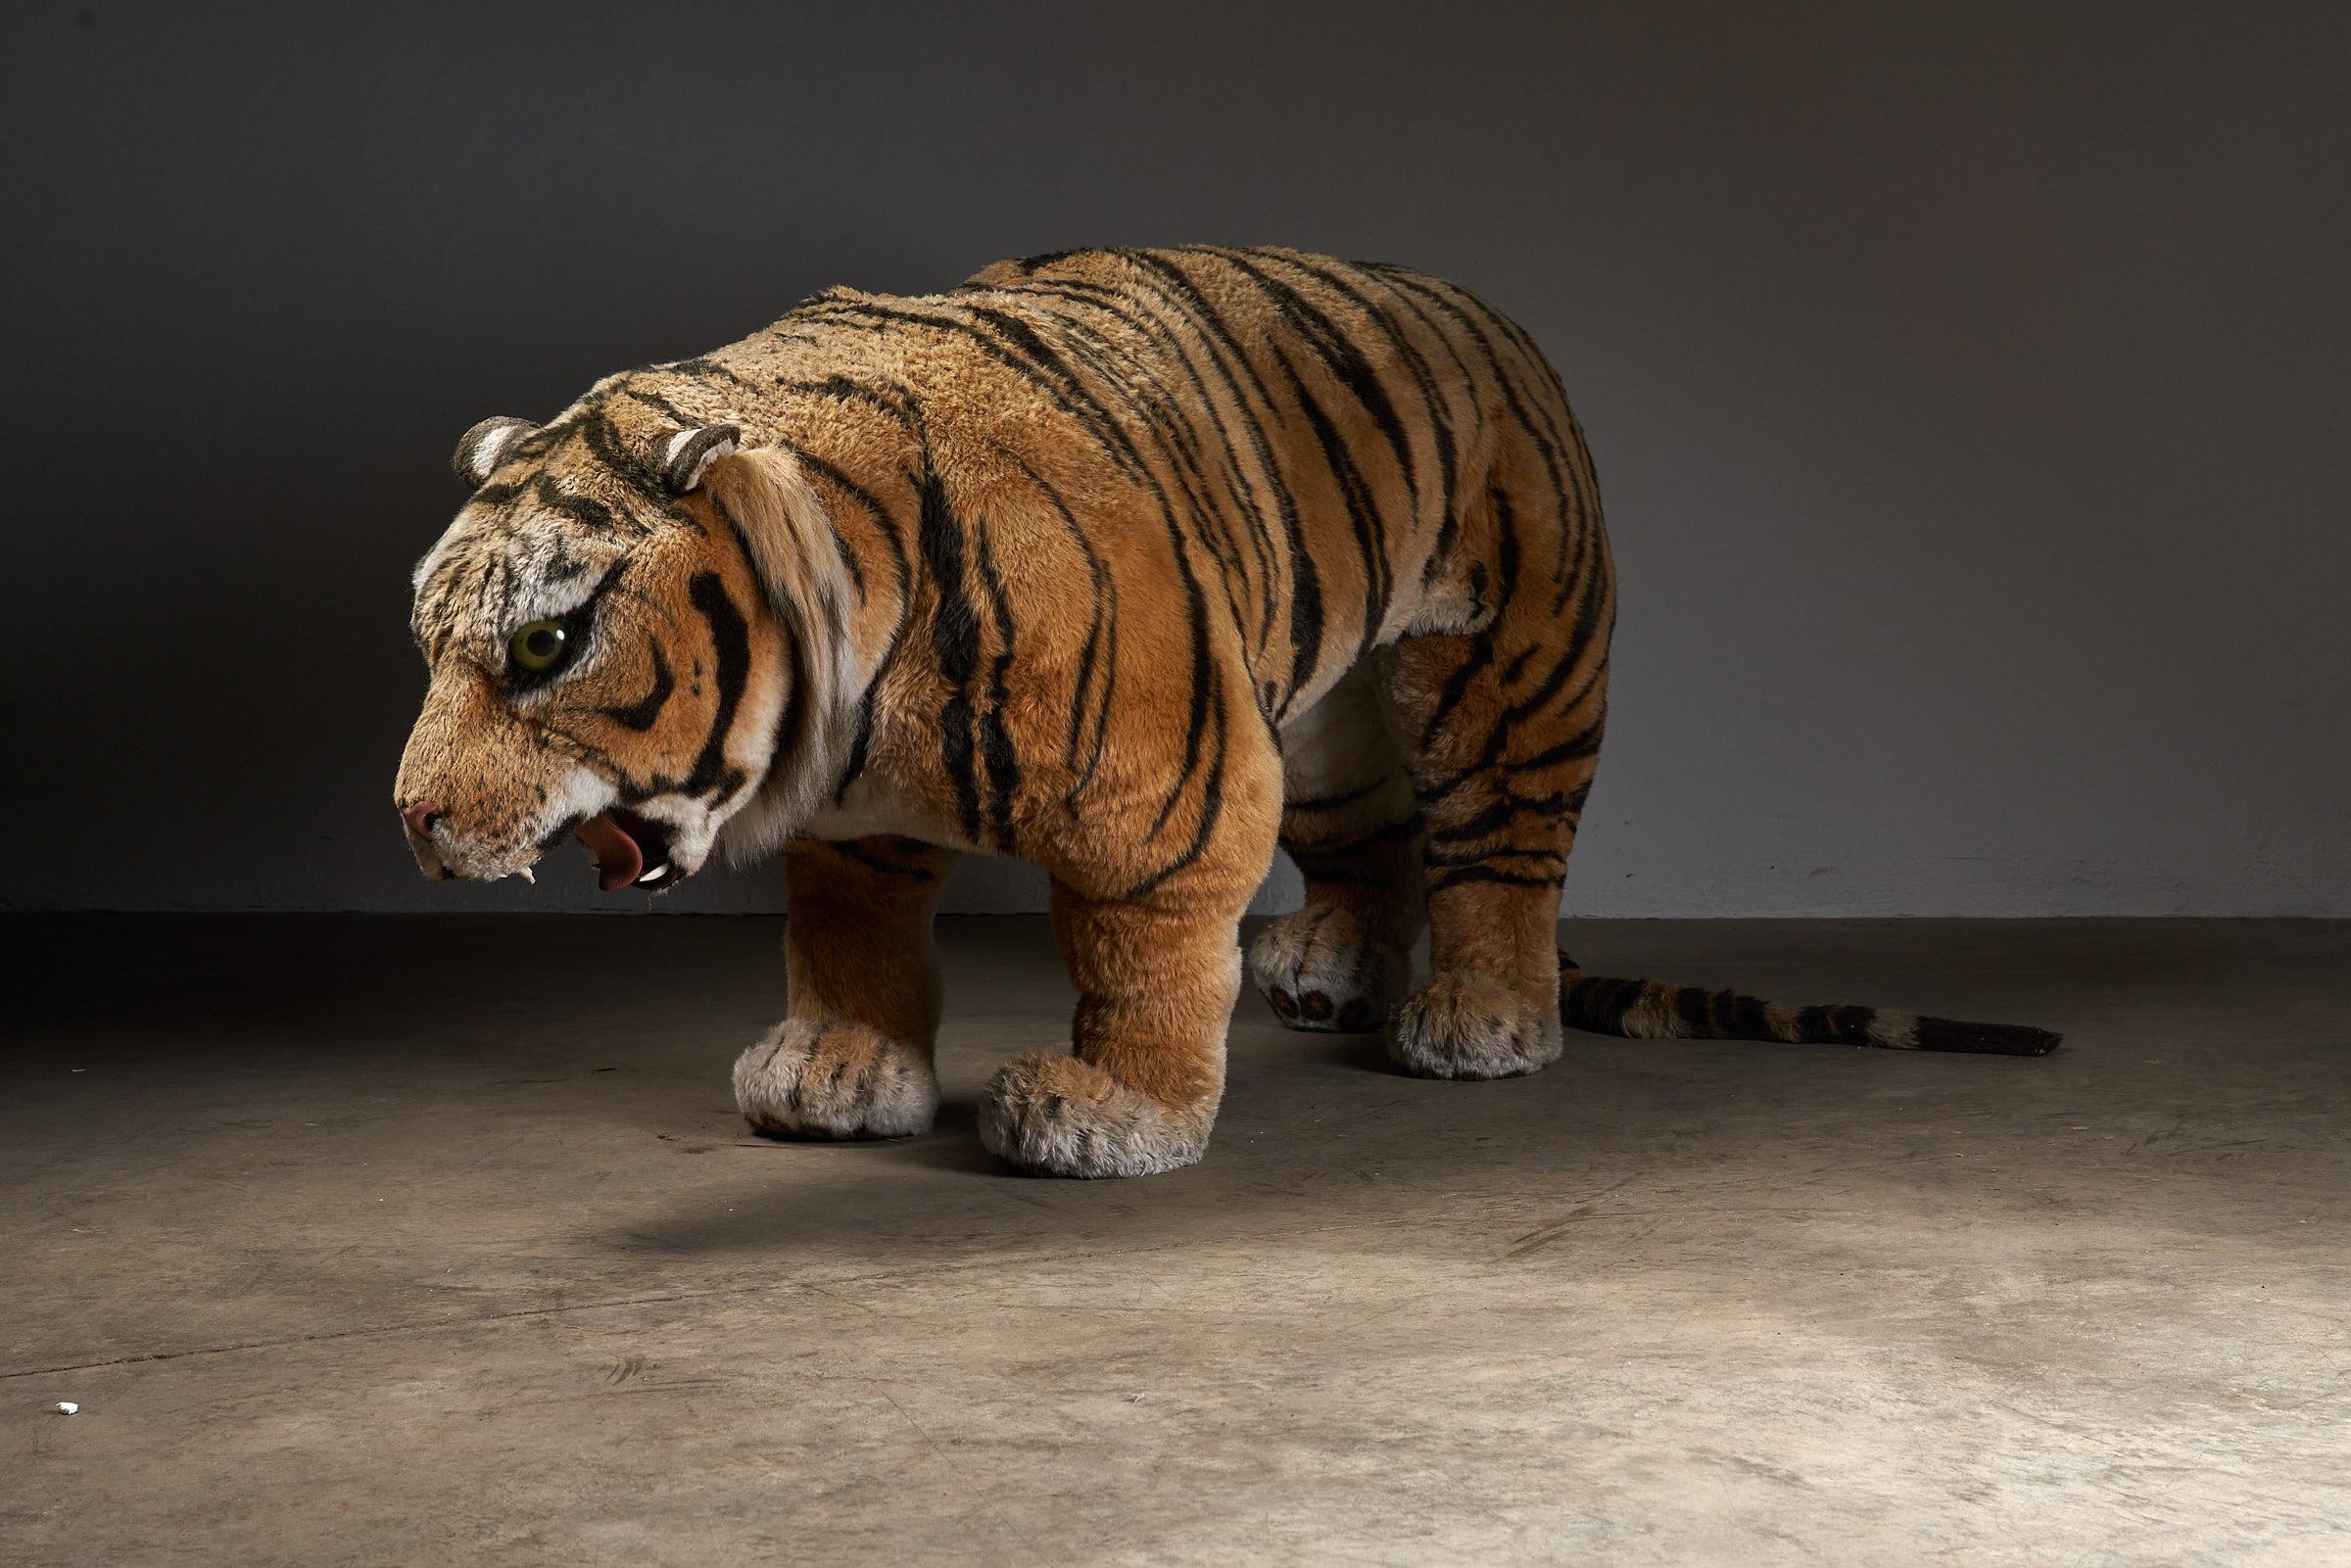 This charming and life-size tiger teddy, originally crafted as a toy for the children's room, is a testament to quality craftsmanship. Exceptionally well-made, it features an interactive element—when you sit on the back, the head playfully pops up